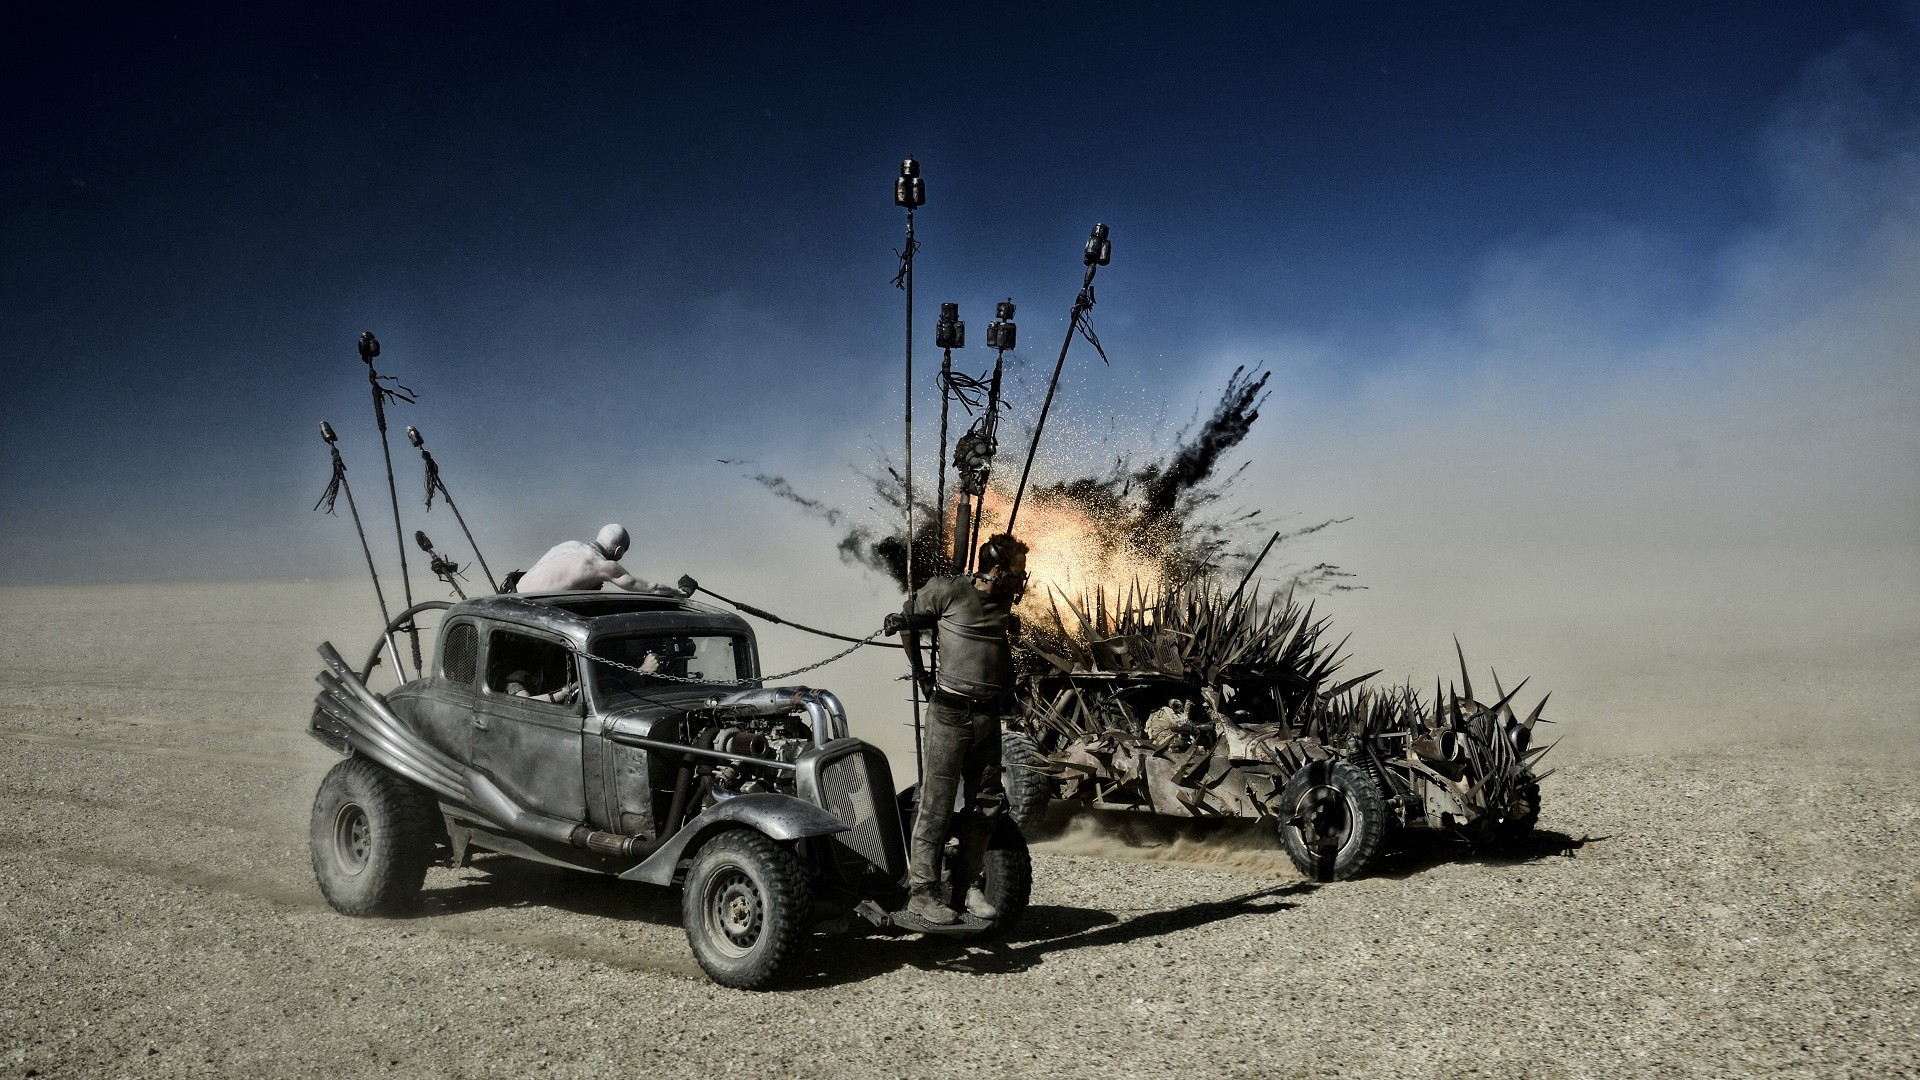 General 1920x1080 Mad Max Mad Max: Fury Road car movies fire explosion smoke Tom Hardy vehicle science fiction apocalyptic